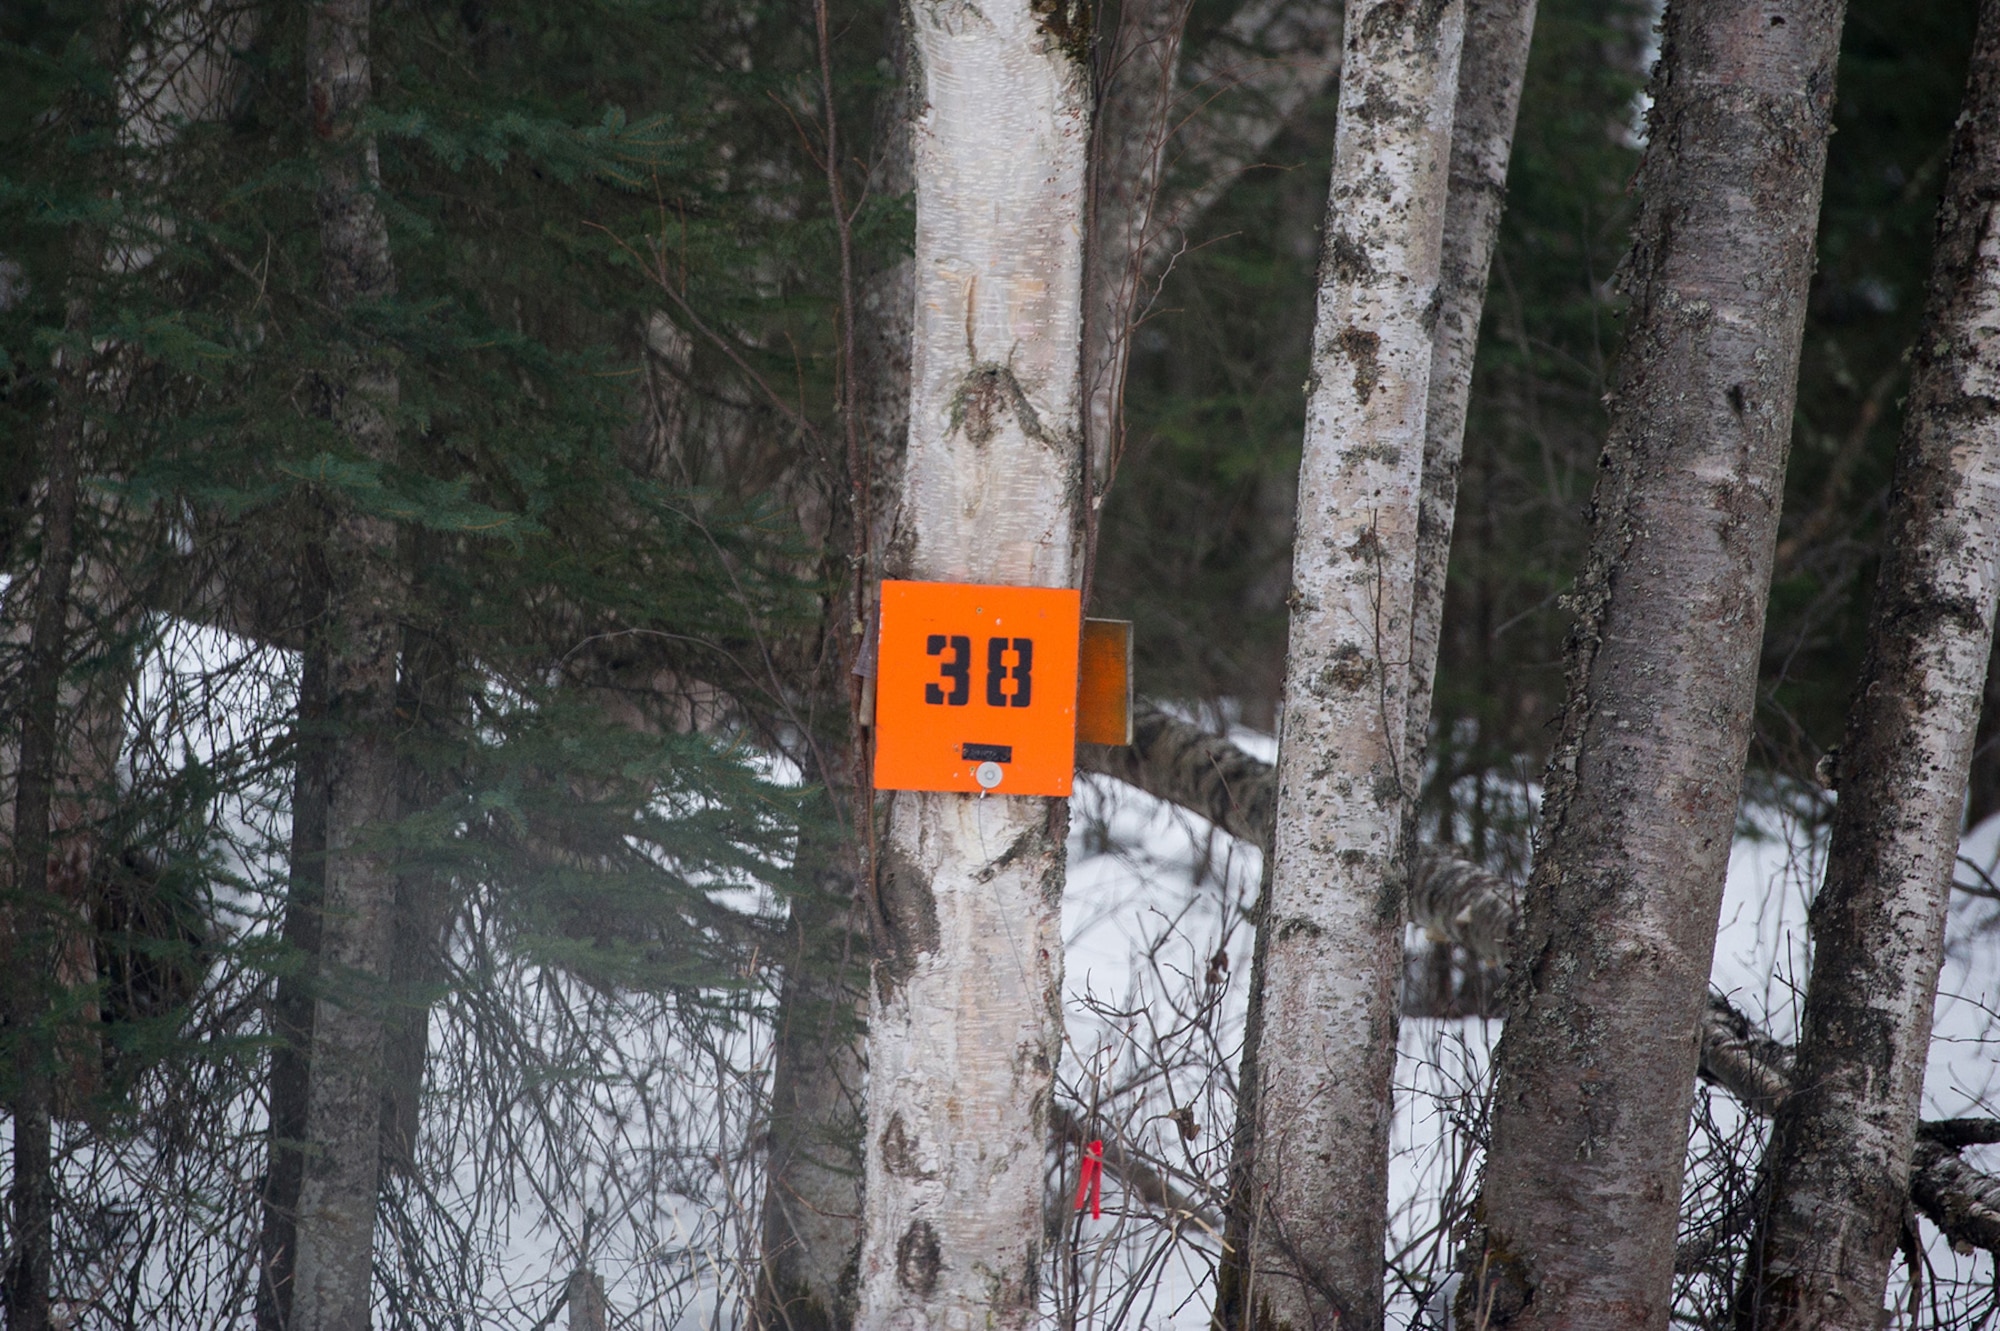 A navigation point is seen on a tree as paratroopers assigned to the 4th Infantry Brigade Combat Team (Airborne), 25th Infantry Division, U.S. Army Alaska, conduct a land navigation course on Joint Base Elmendorf-Richardson, Alaska, April 4, 2018.  The Soldiers used their skills to plot courses using a lensatic compass, protractor, and a 1:25,000 scale map to navigate to, and locate points using provided grid coordinates within a predetermined time.